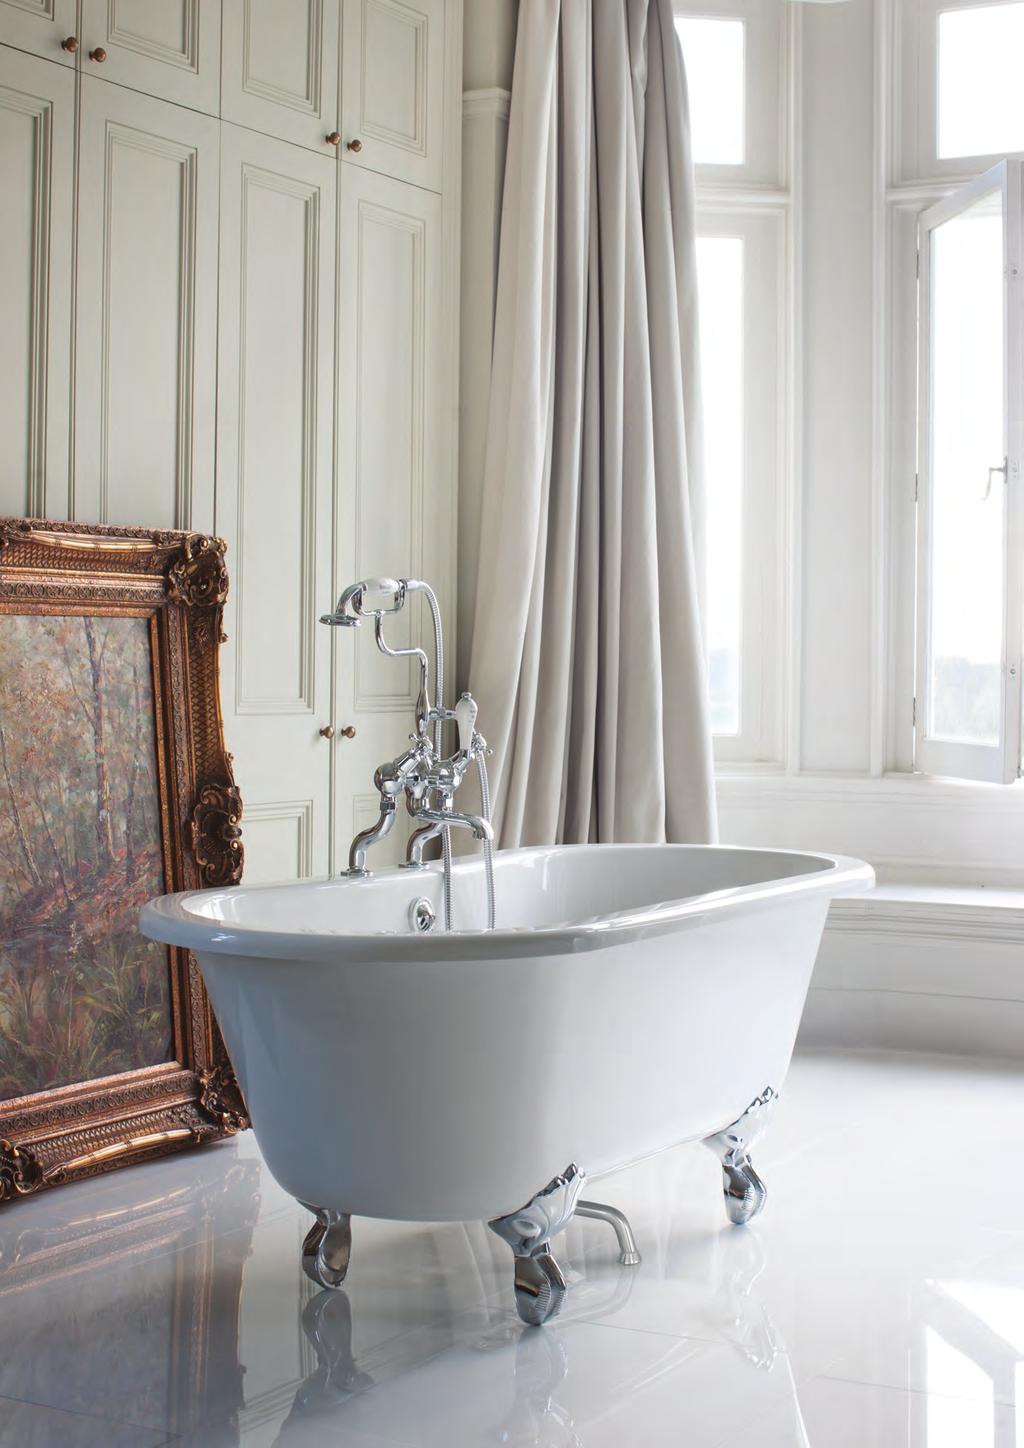 DOUBLE ENDED BATHS - BRINDLEY DOUBLE ENDED BATHS - WINDSOR WINDSOR The Windsor bath is a gorgeous example of a traditional roll top bath with perfectly formed curved and flowing lines.